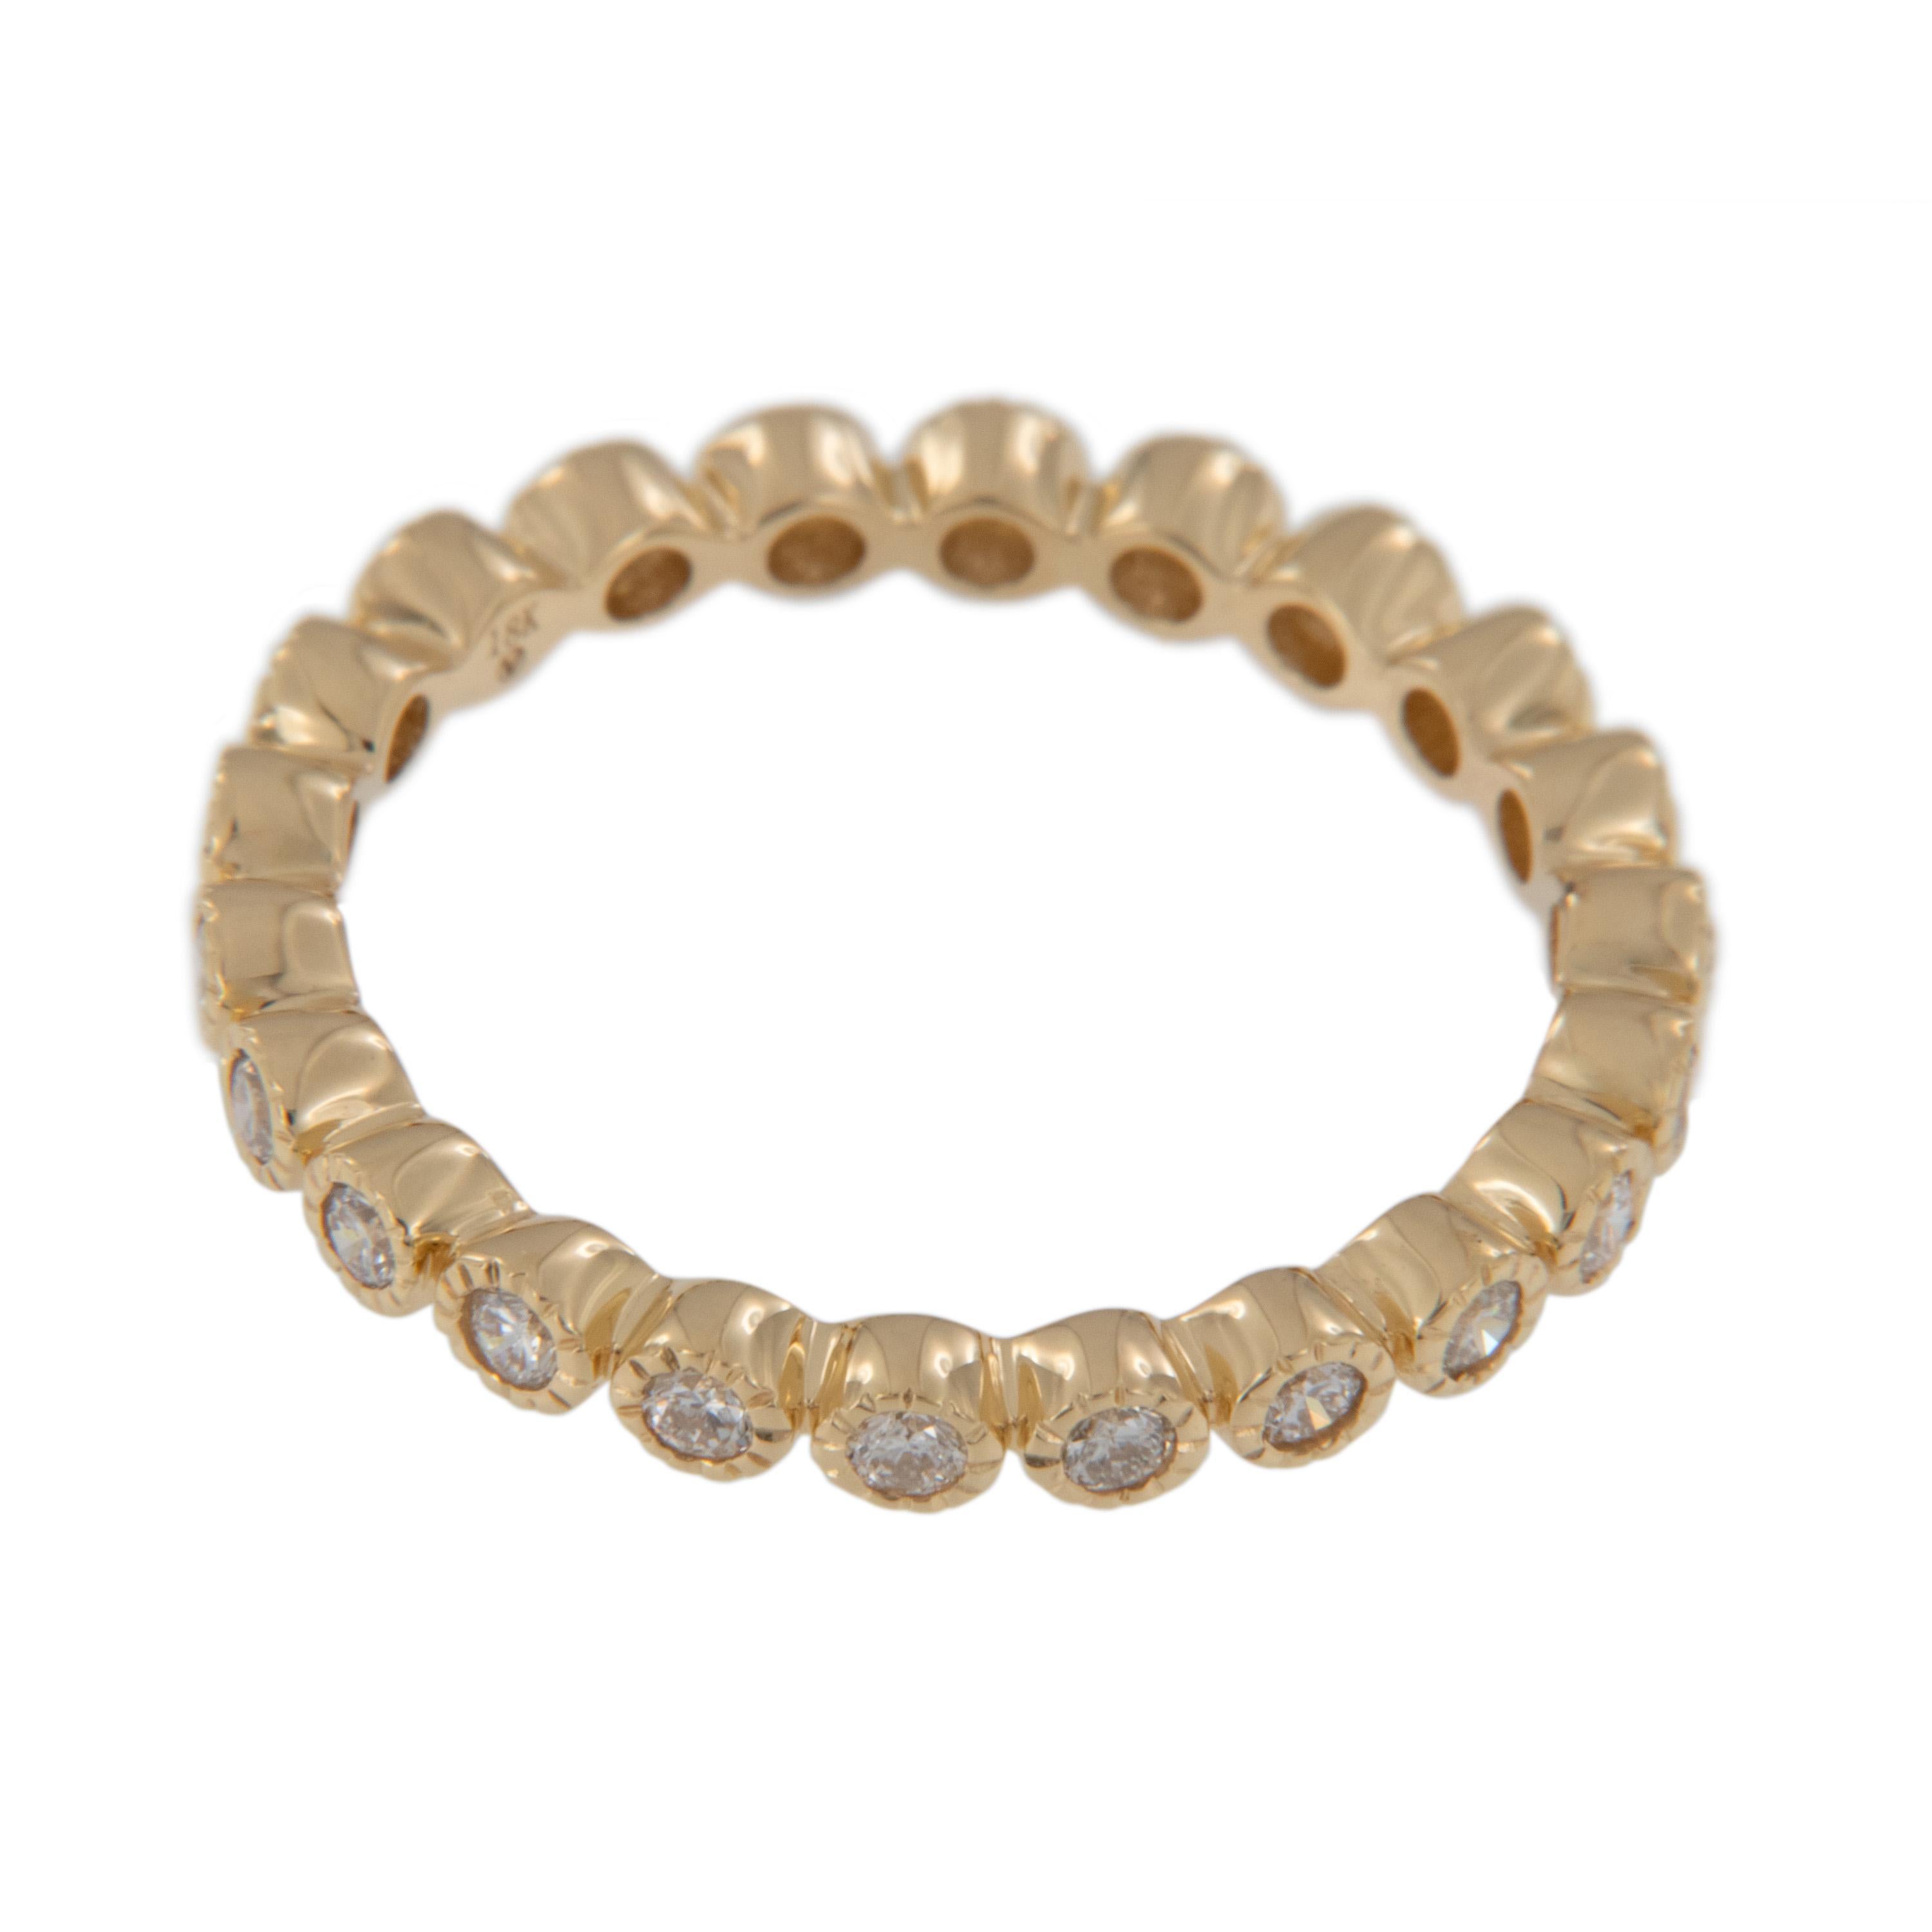 Created from rich 18 karat yellow gold, this beautiful eternity band boasts 23 fine round brilliant cut diamonds = 0.42 Cttw each individually set in milgrain edged bezels for a stunning look on its own or check out our white and rose gold matching